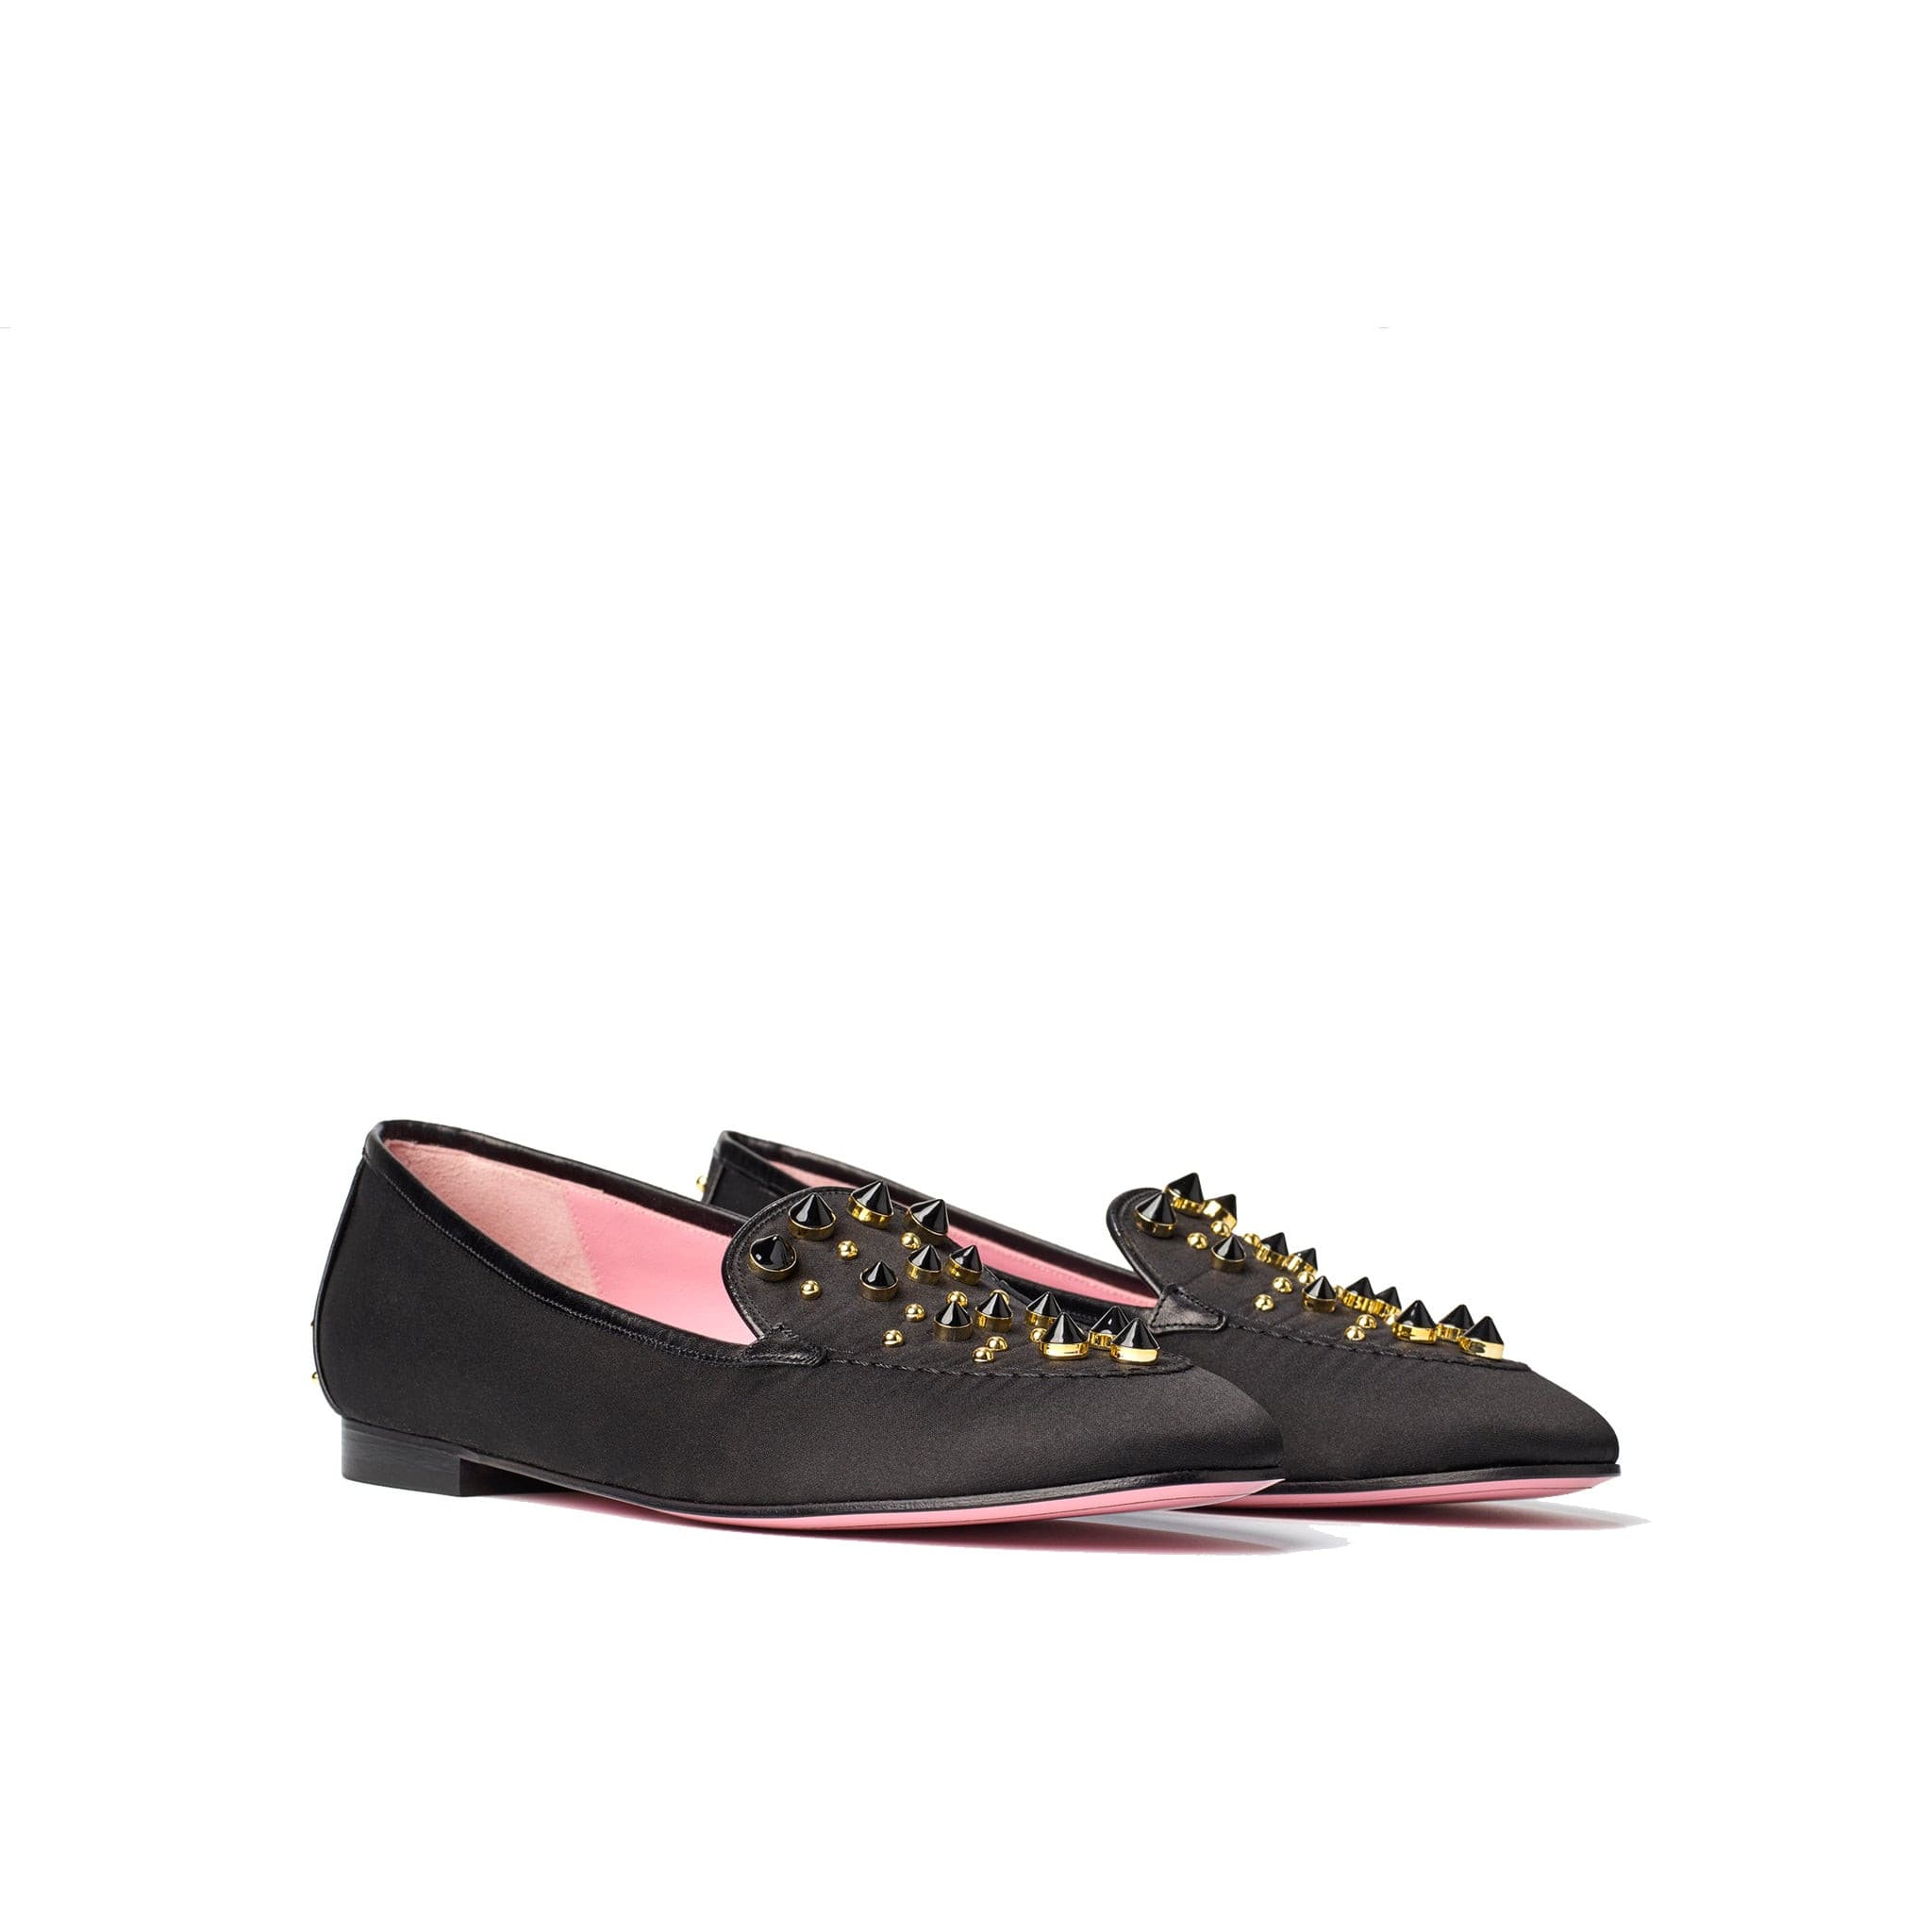 Phare studded loafer in black silk satin with black gold studs 3/4 view 